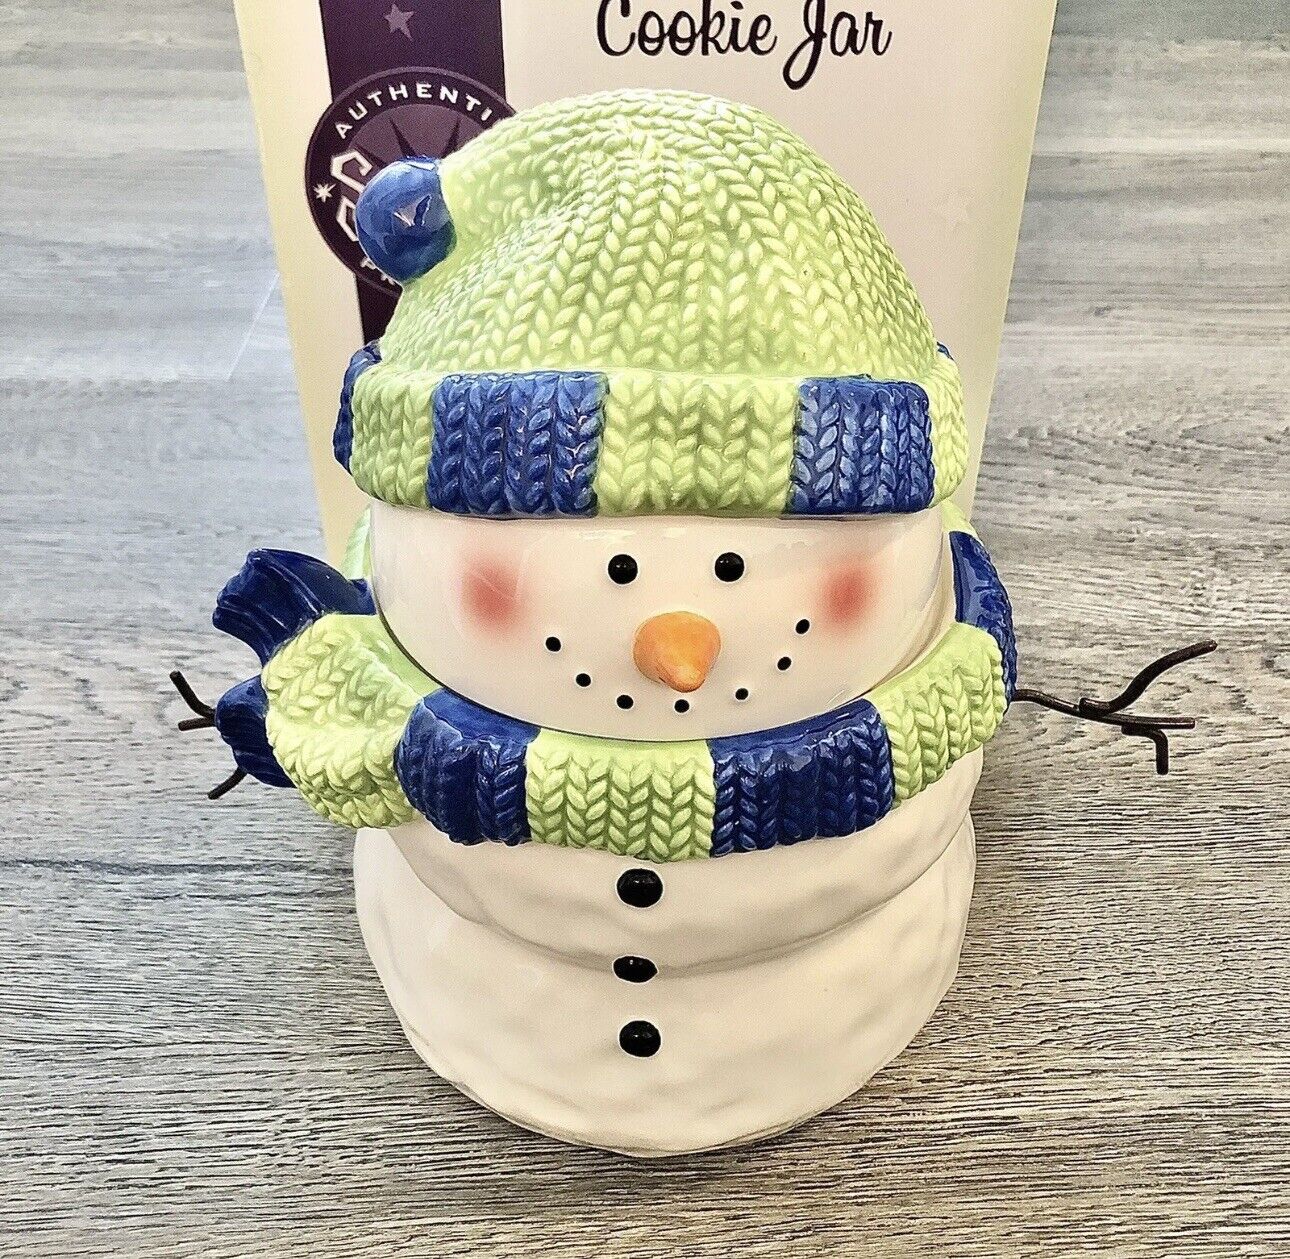 Scentsy Snowman Cookie Jar - Host Exclusive - Brand New in Box - Warmer Gift